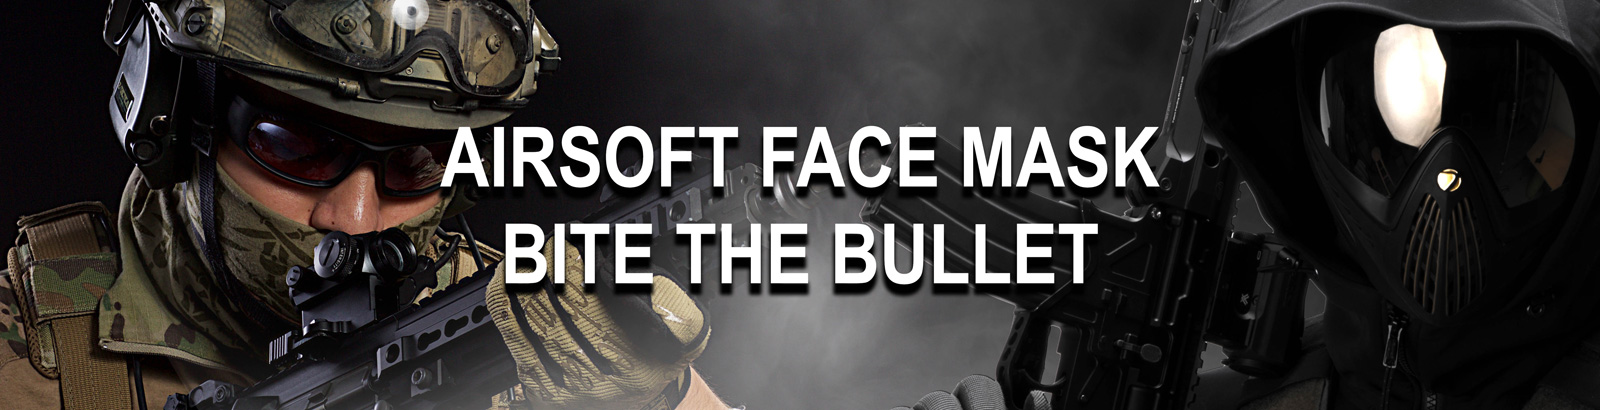 AIRSOFT FACE MASK